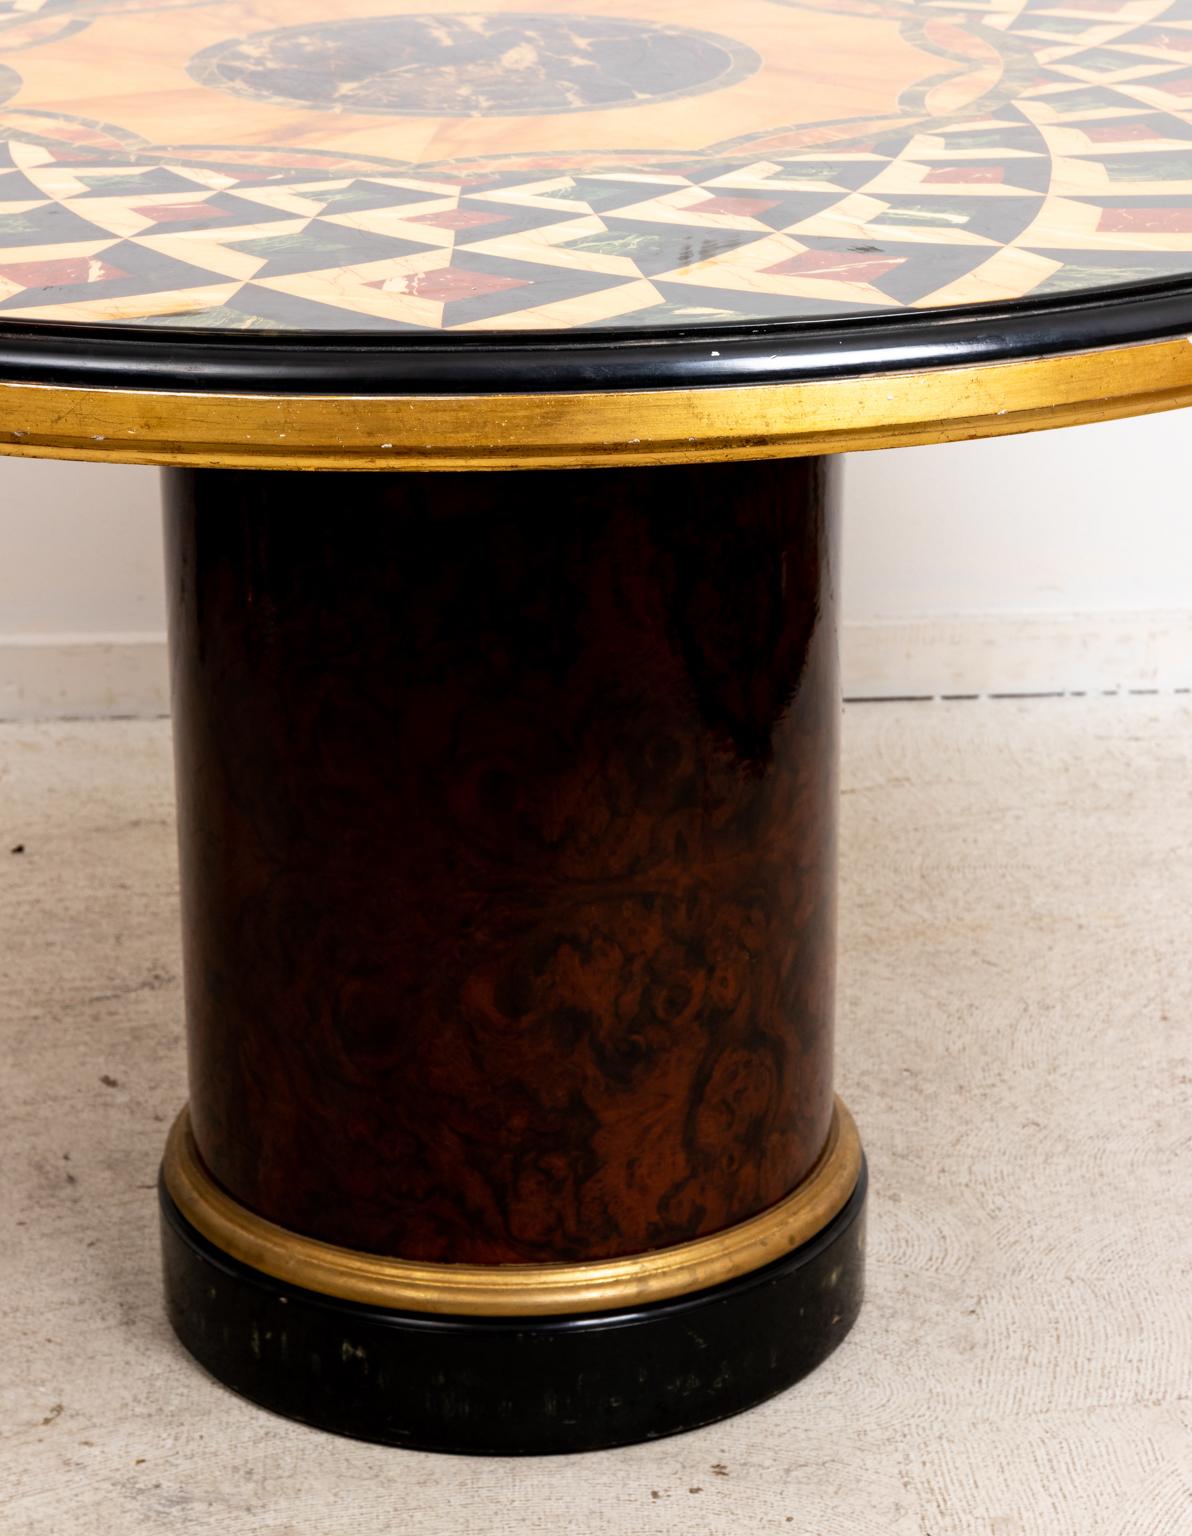 Faux marble decorated center table on a drum shaped pedestal base. The tabletop is heavily detailed in faux marble with a repeating geometric pattern and center patera medallion. Please note of wear consistent with age including minor finish loss.